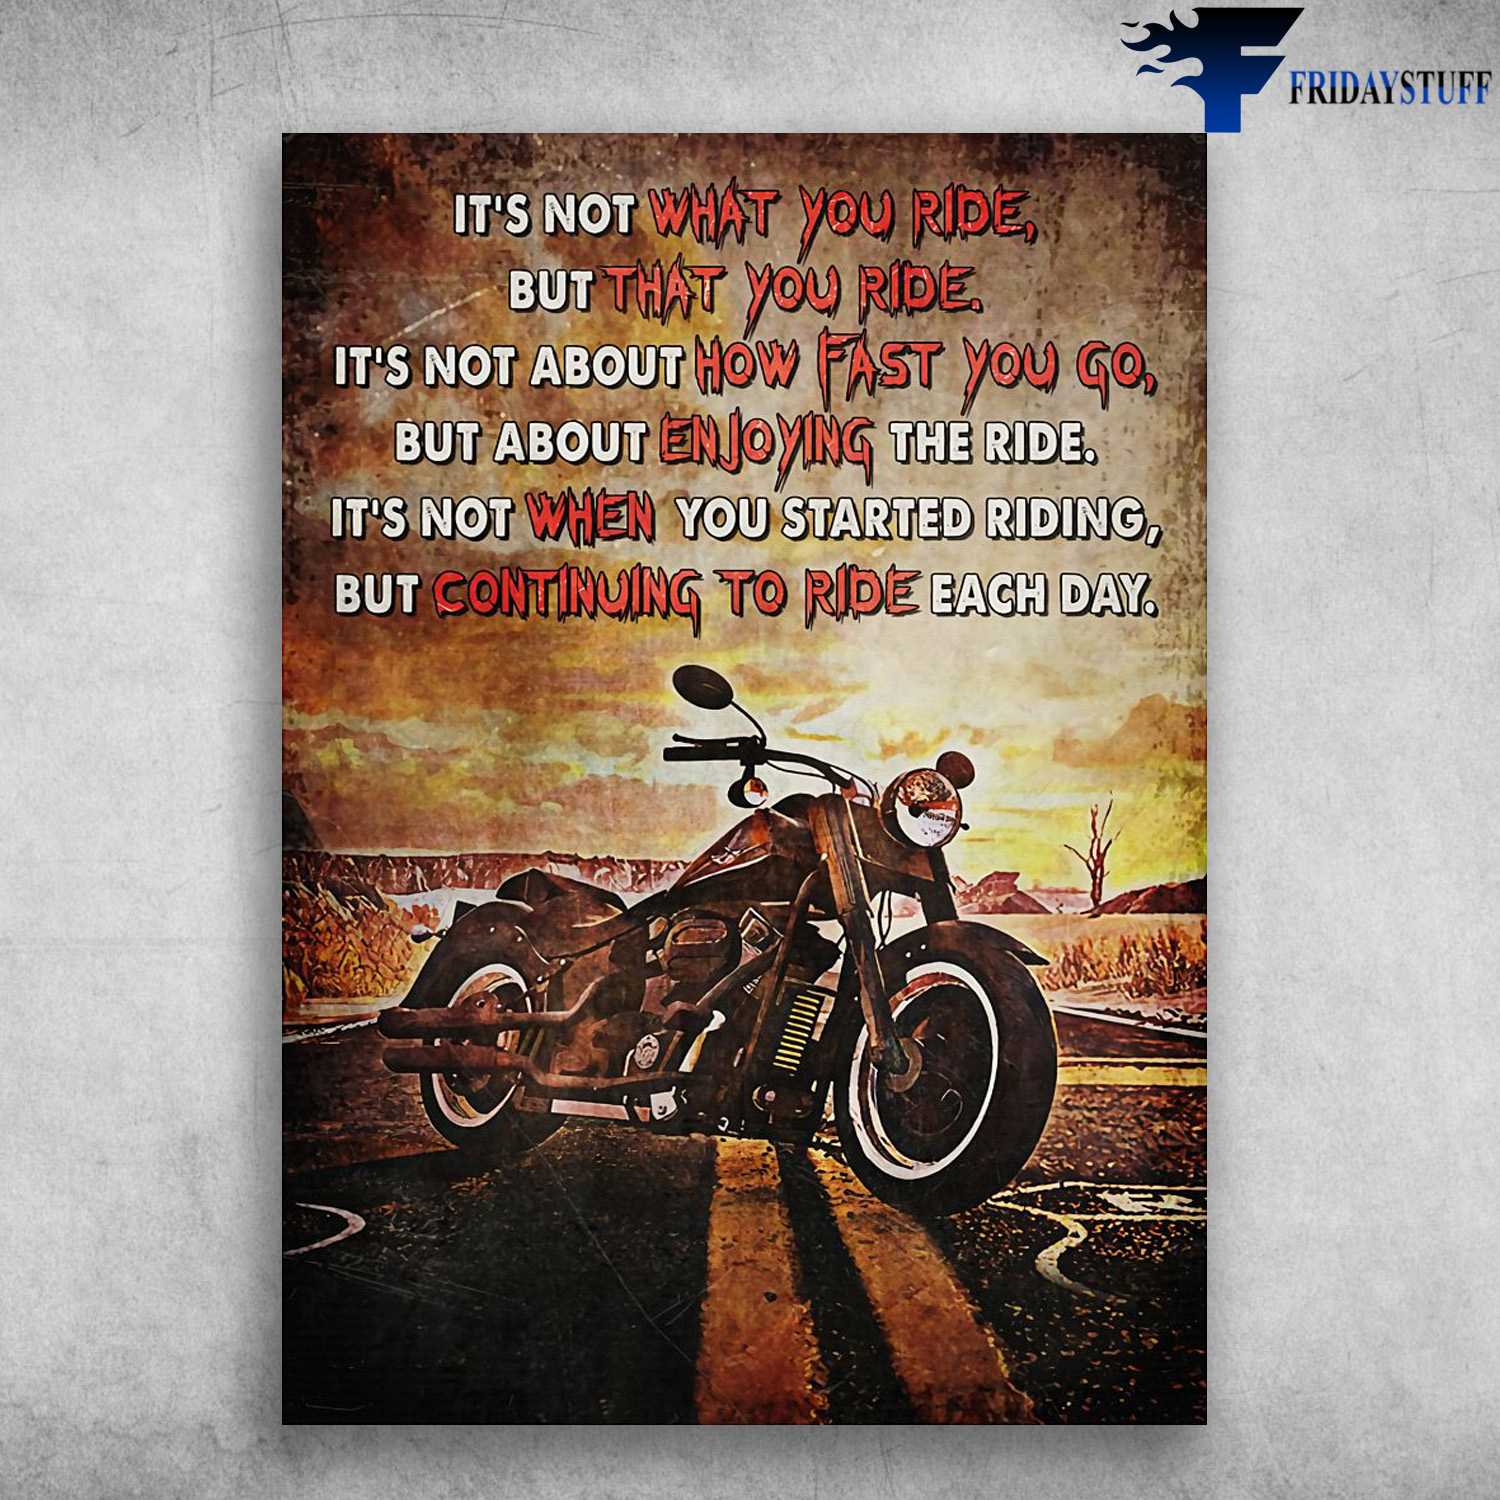 Motorcycle Poster, Biker Lover - It's Not What You Ride, But That You Ride, It's Not About How Fast You Go, But About Enjoying The Ride